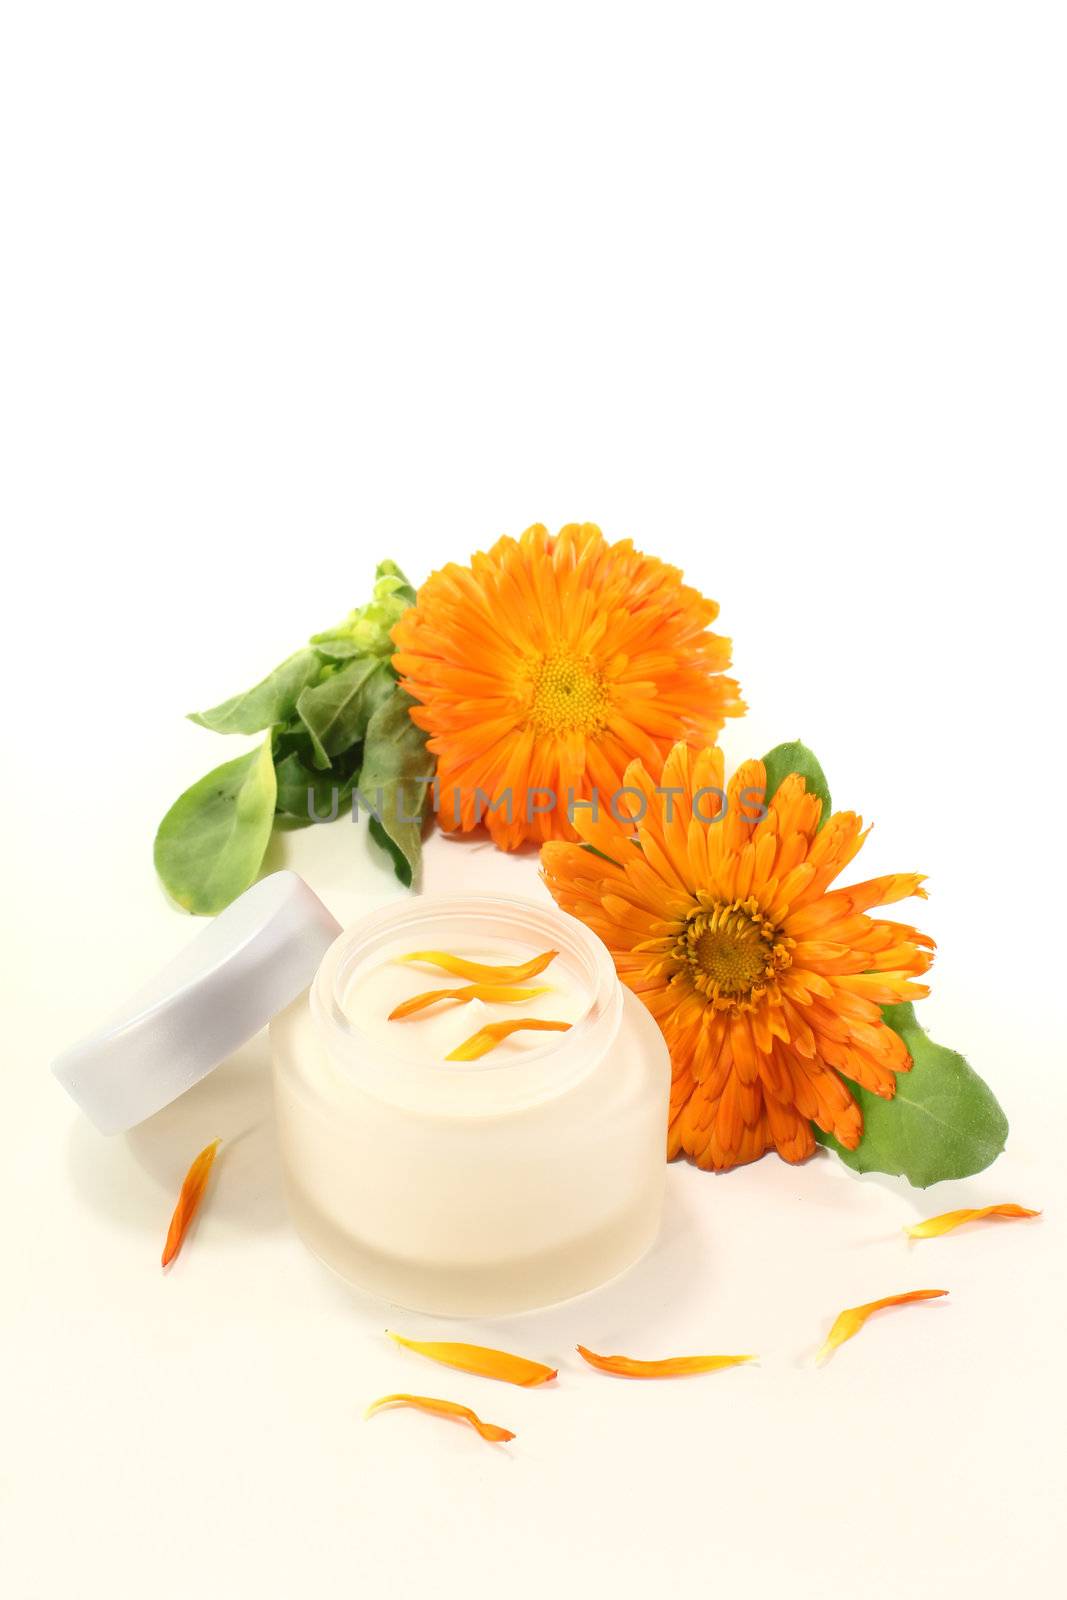 Calendula ointment with marigold flowers, leaves and fresh petals on a light background